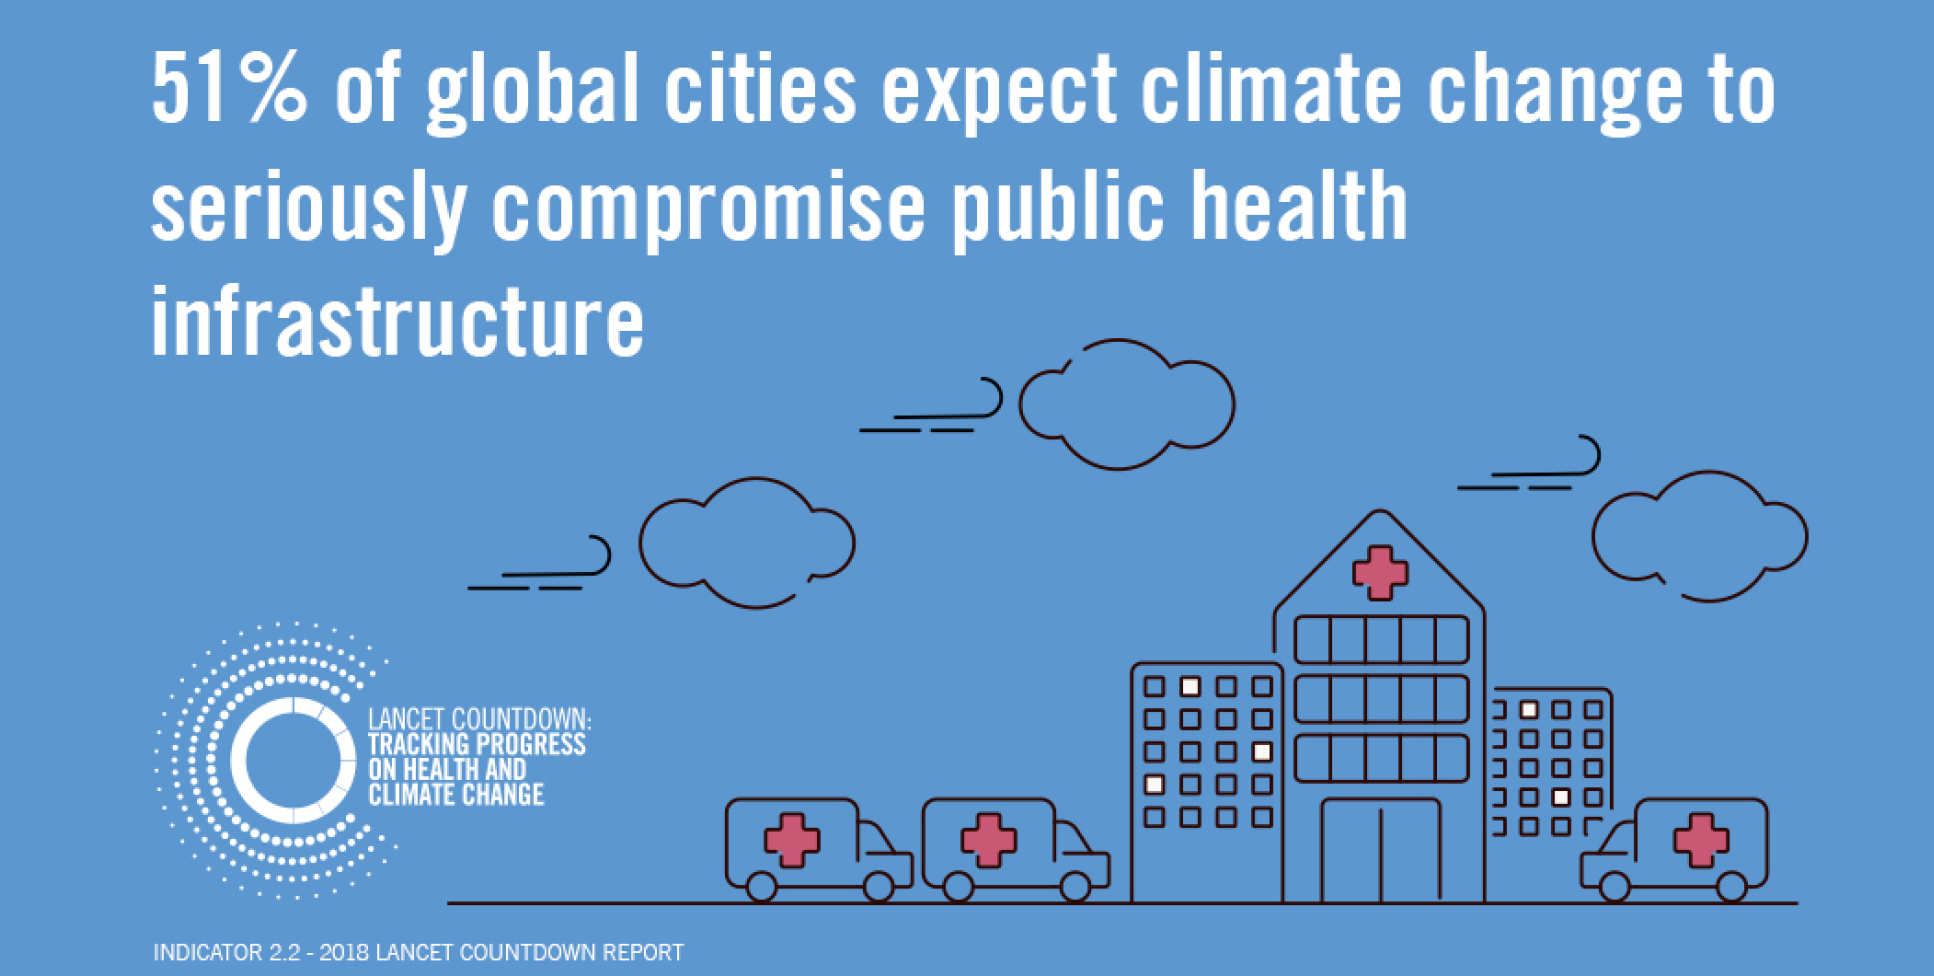 Infographic showing 51% cities expect climate change to compromise public health facilities